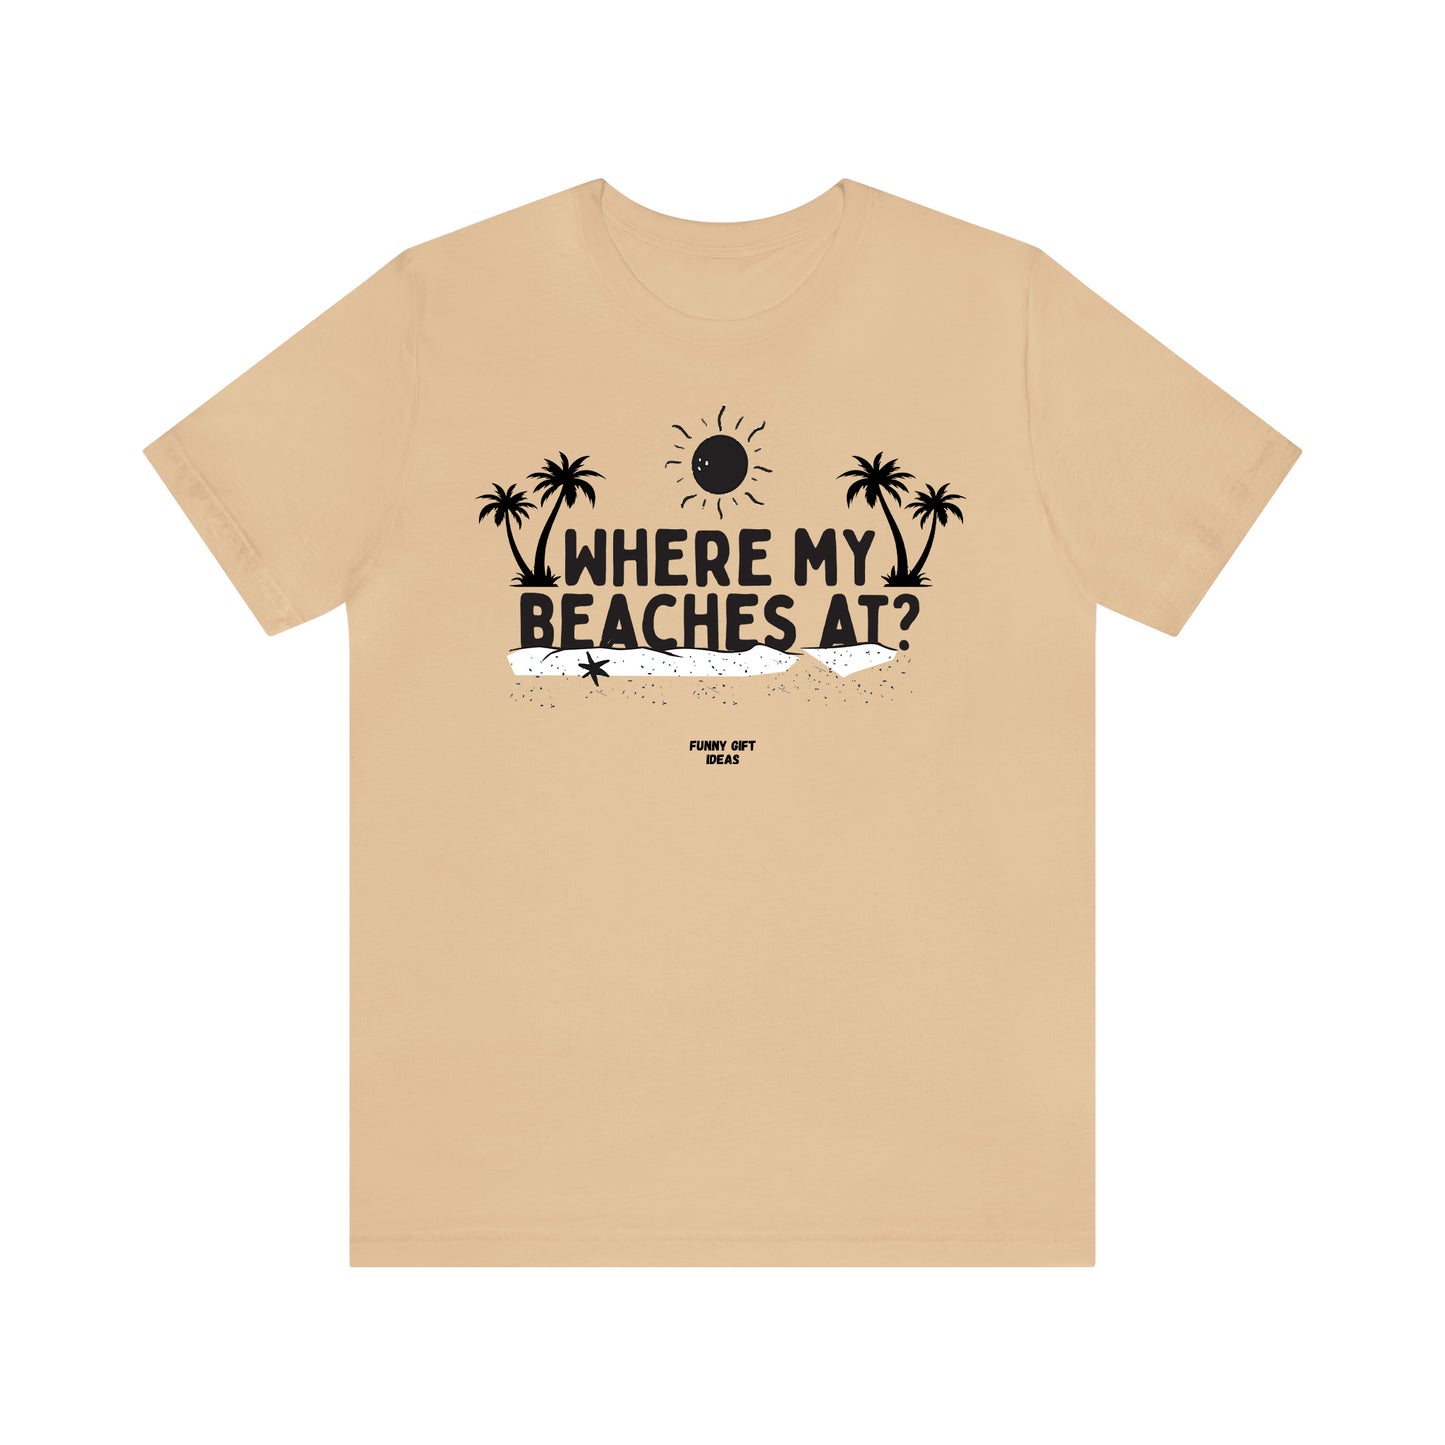 Funny Shirts for Women - Where My Beaches at? - Women's T Shirts